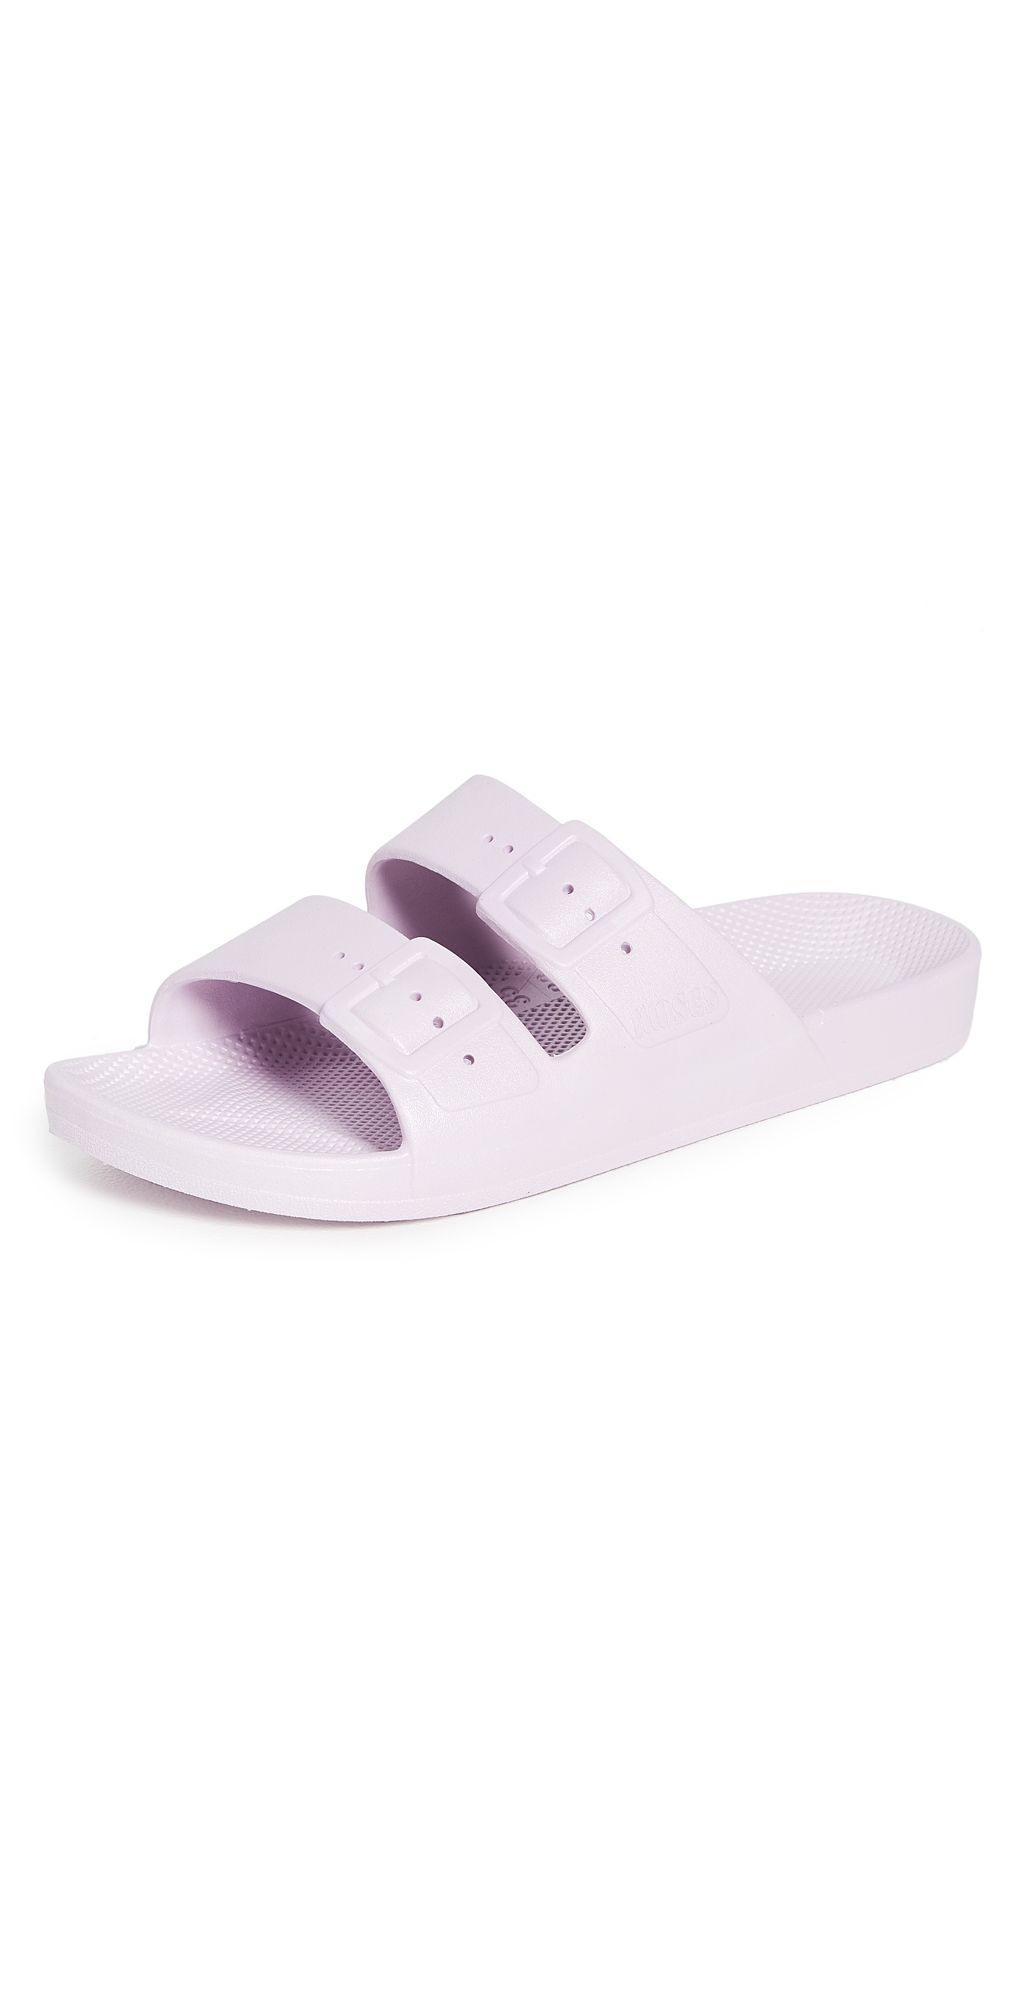 Freedom Moses Moses Two Band Slide Sandals | Shopbop